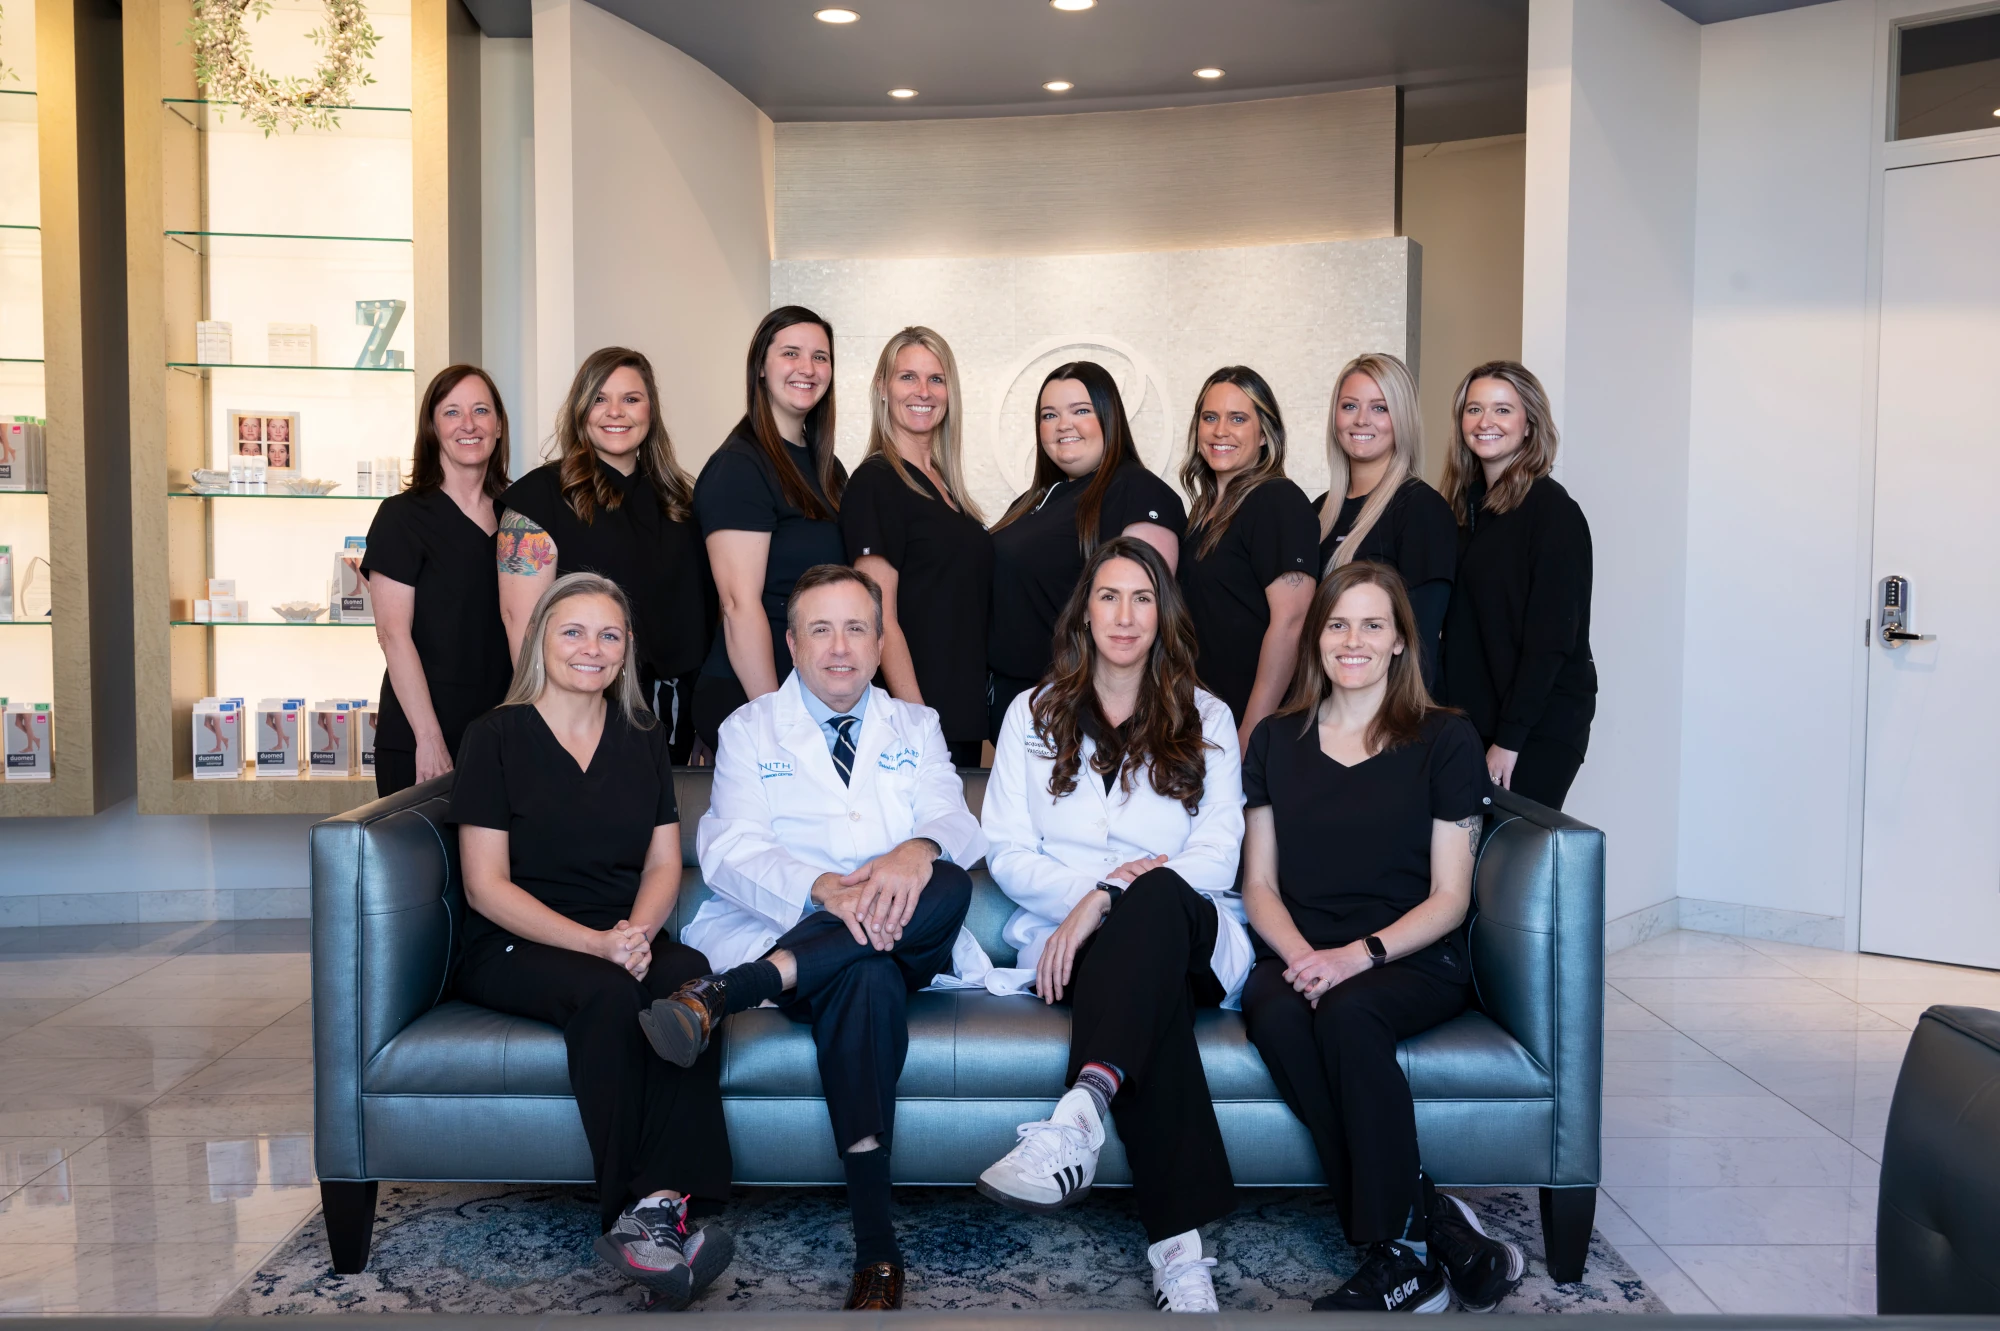 zenith vascular and fibroid center group picture